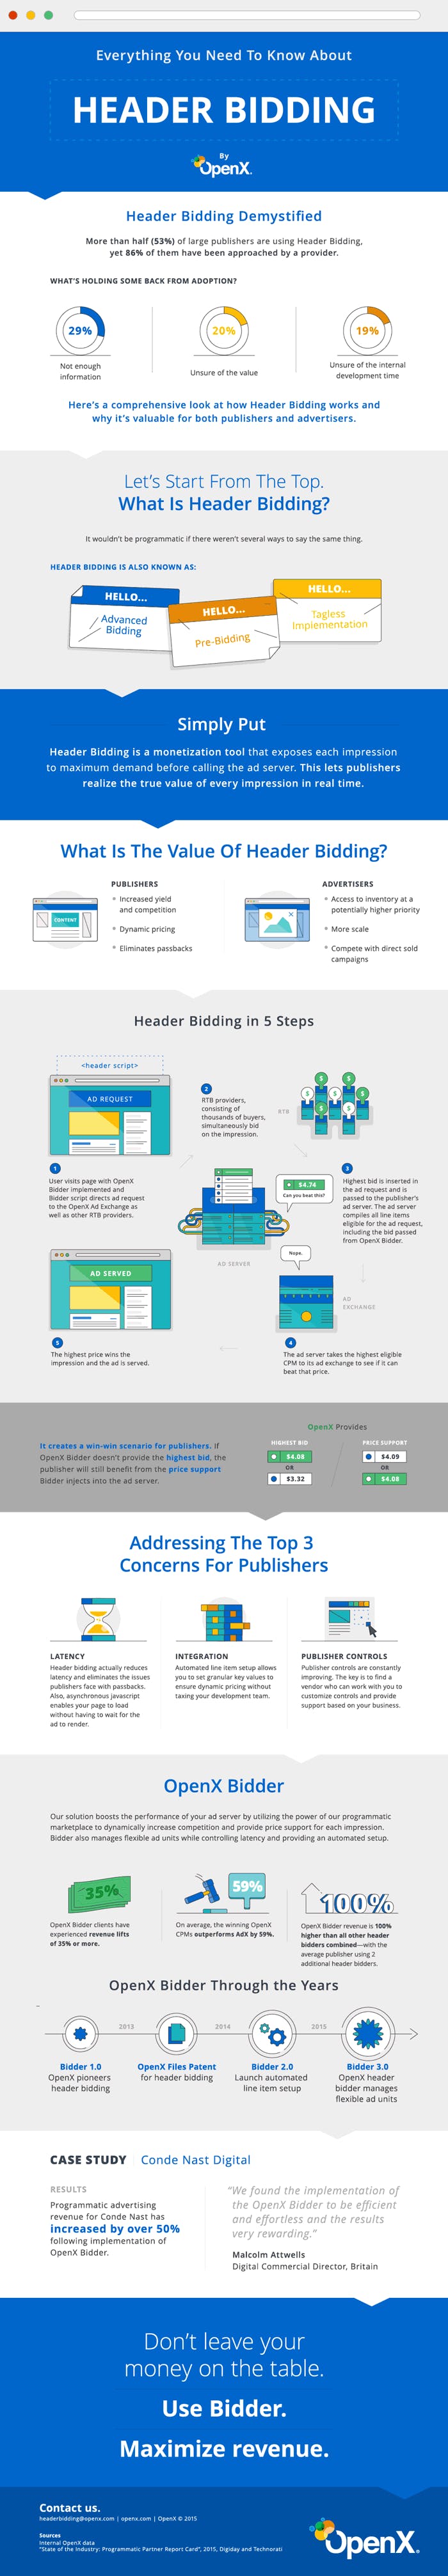 2015 11 25 Header Bidding Infographic - Everything You Need to Know About Header Bidding [Infographic]